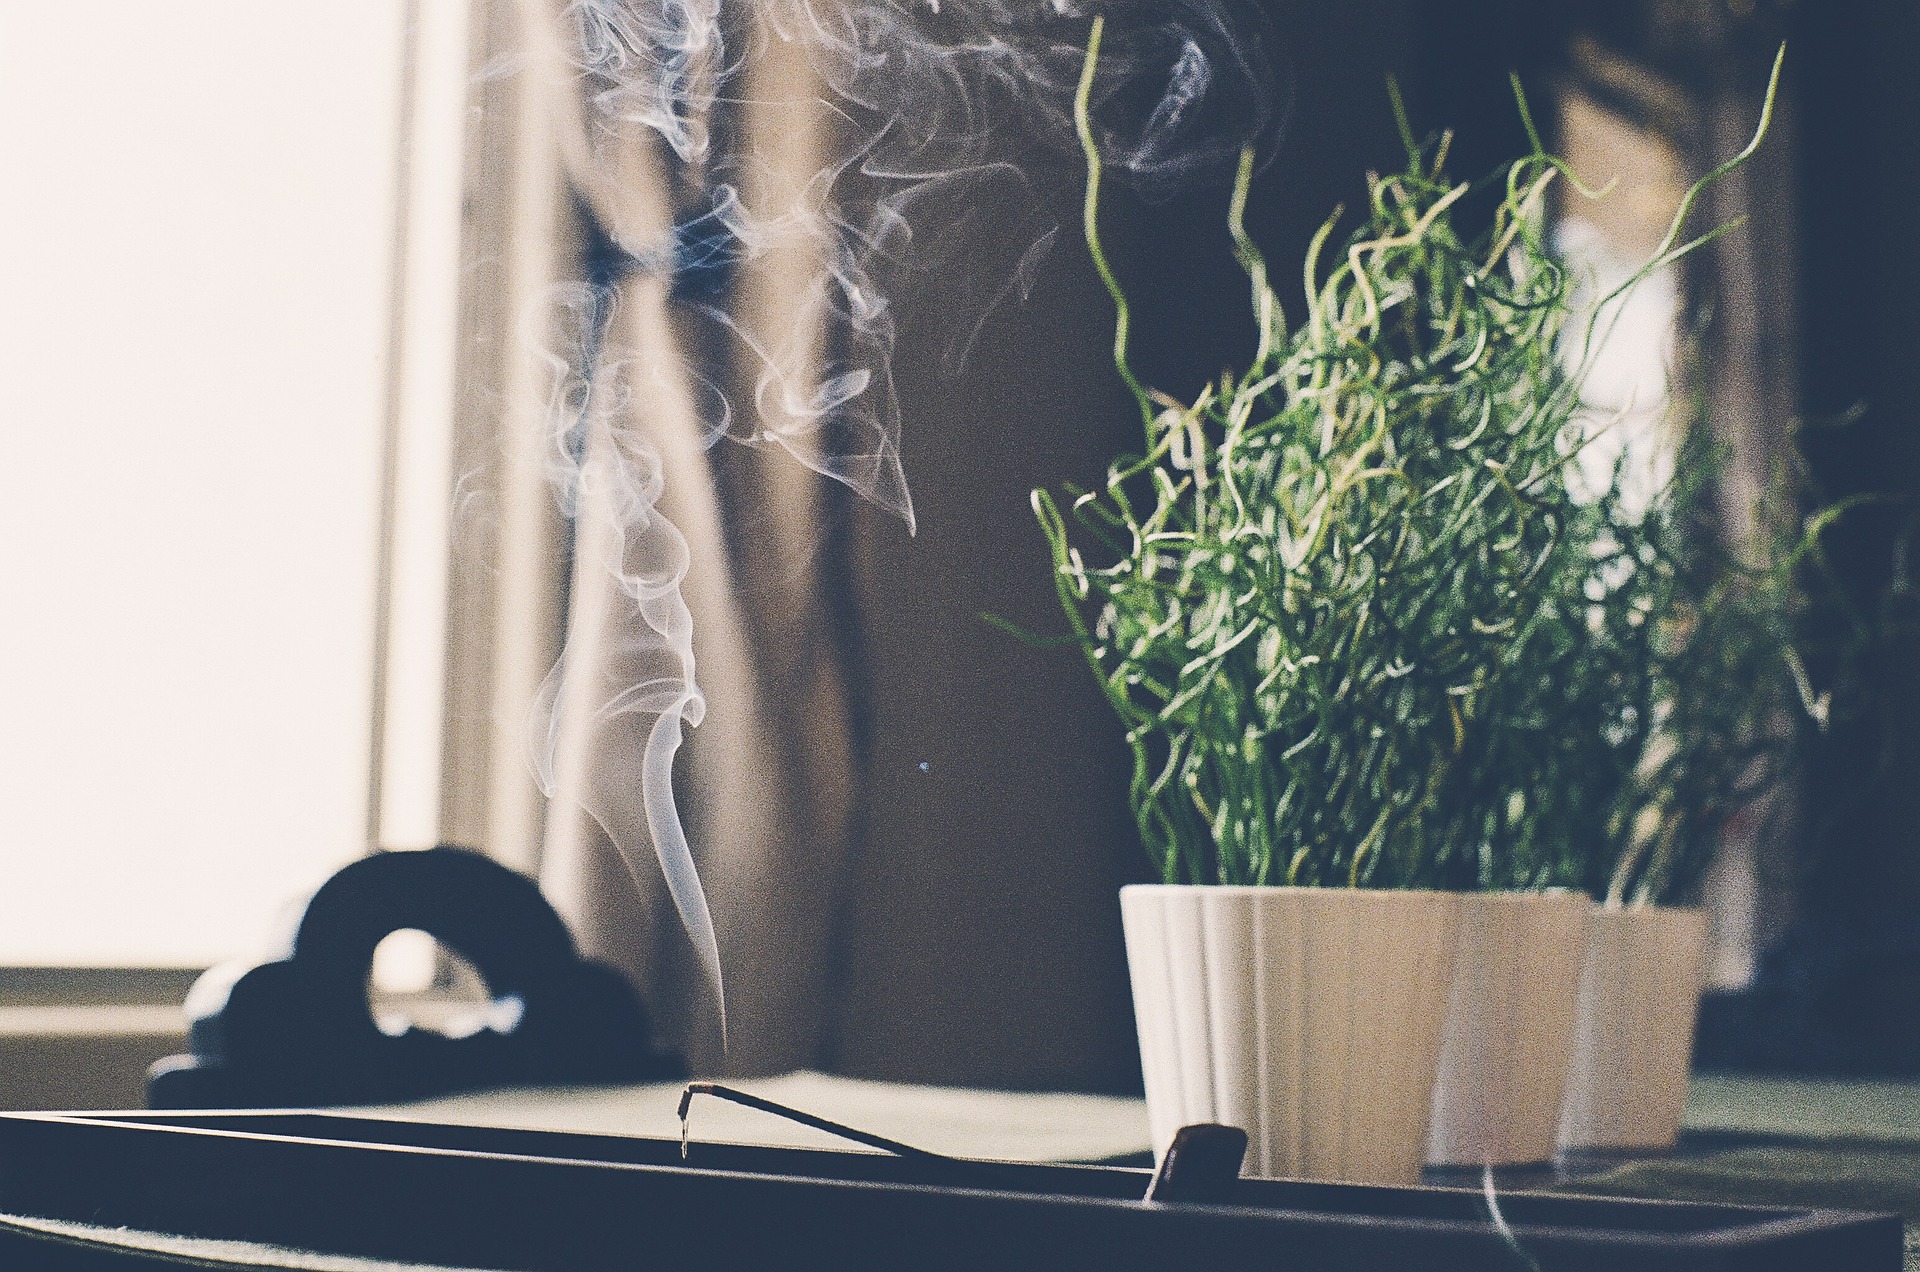 Incense stick alight on a table next to plants